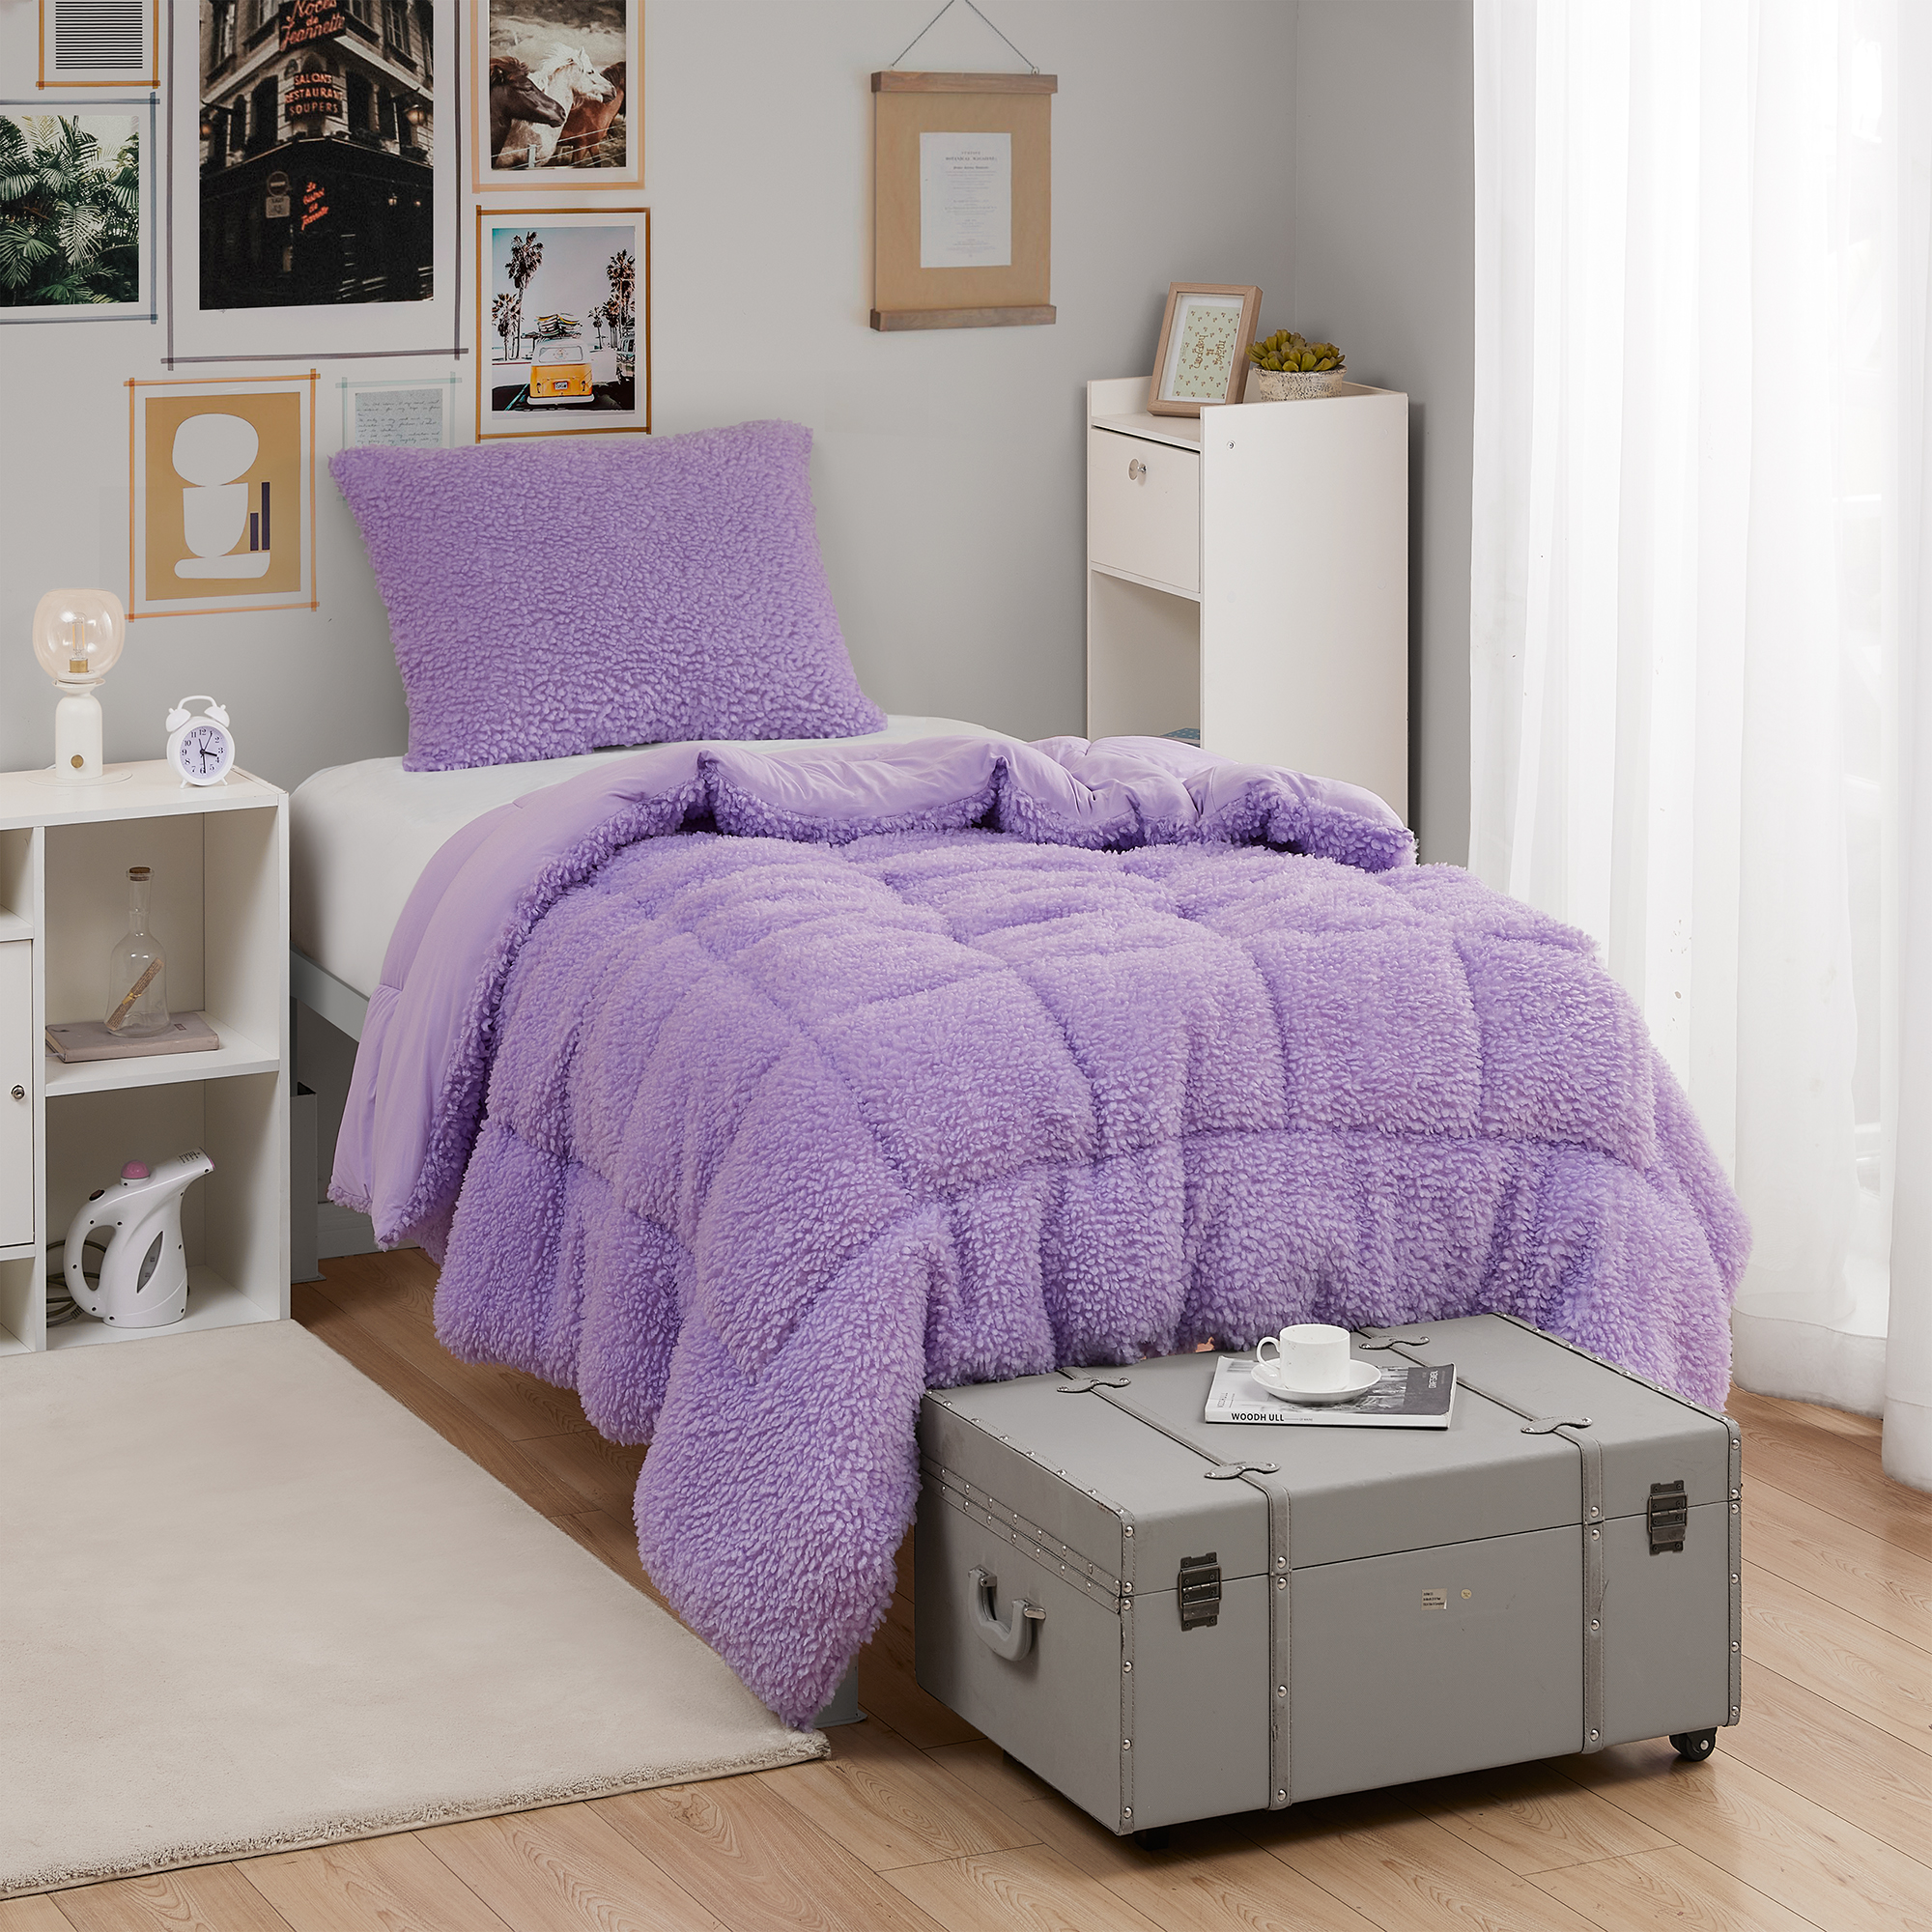 Cotton Candy - Coma Inducer® Twin XL Comforter - Grape Purple